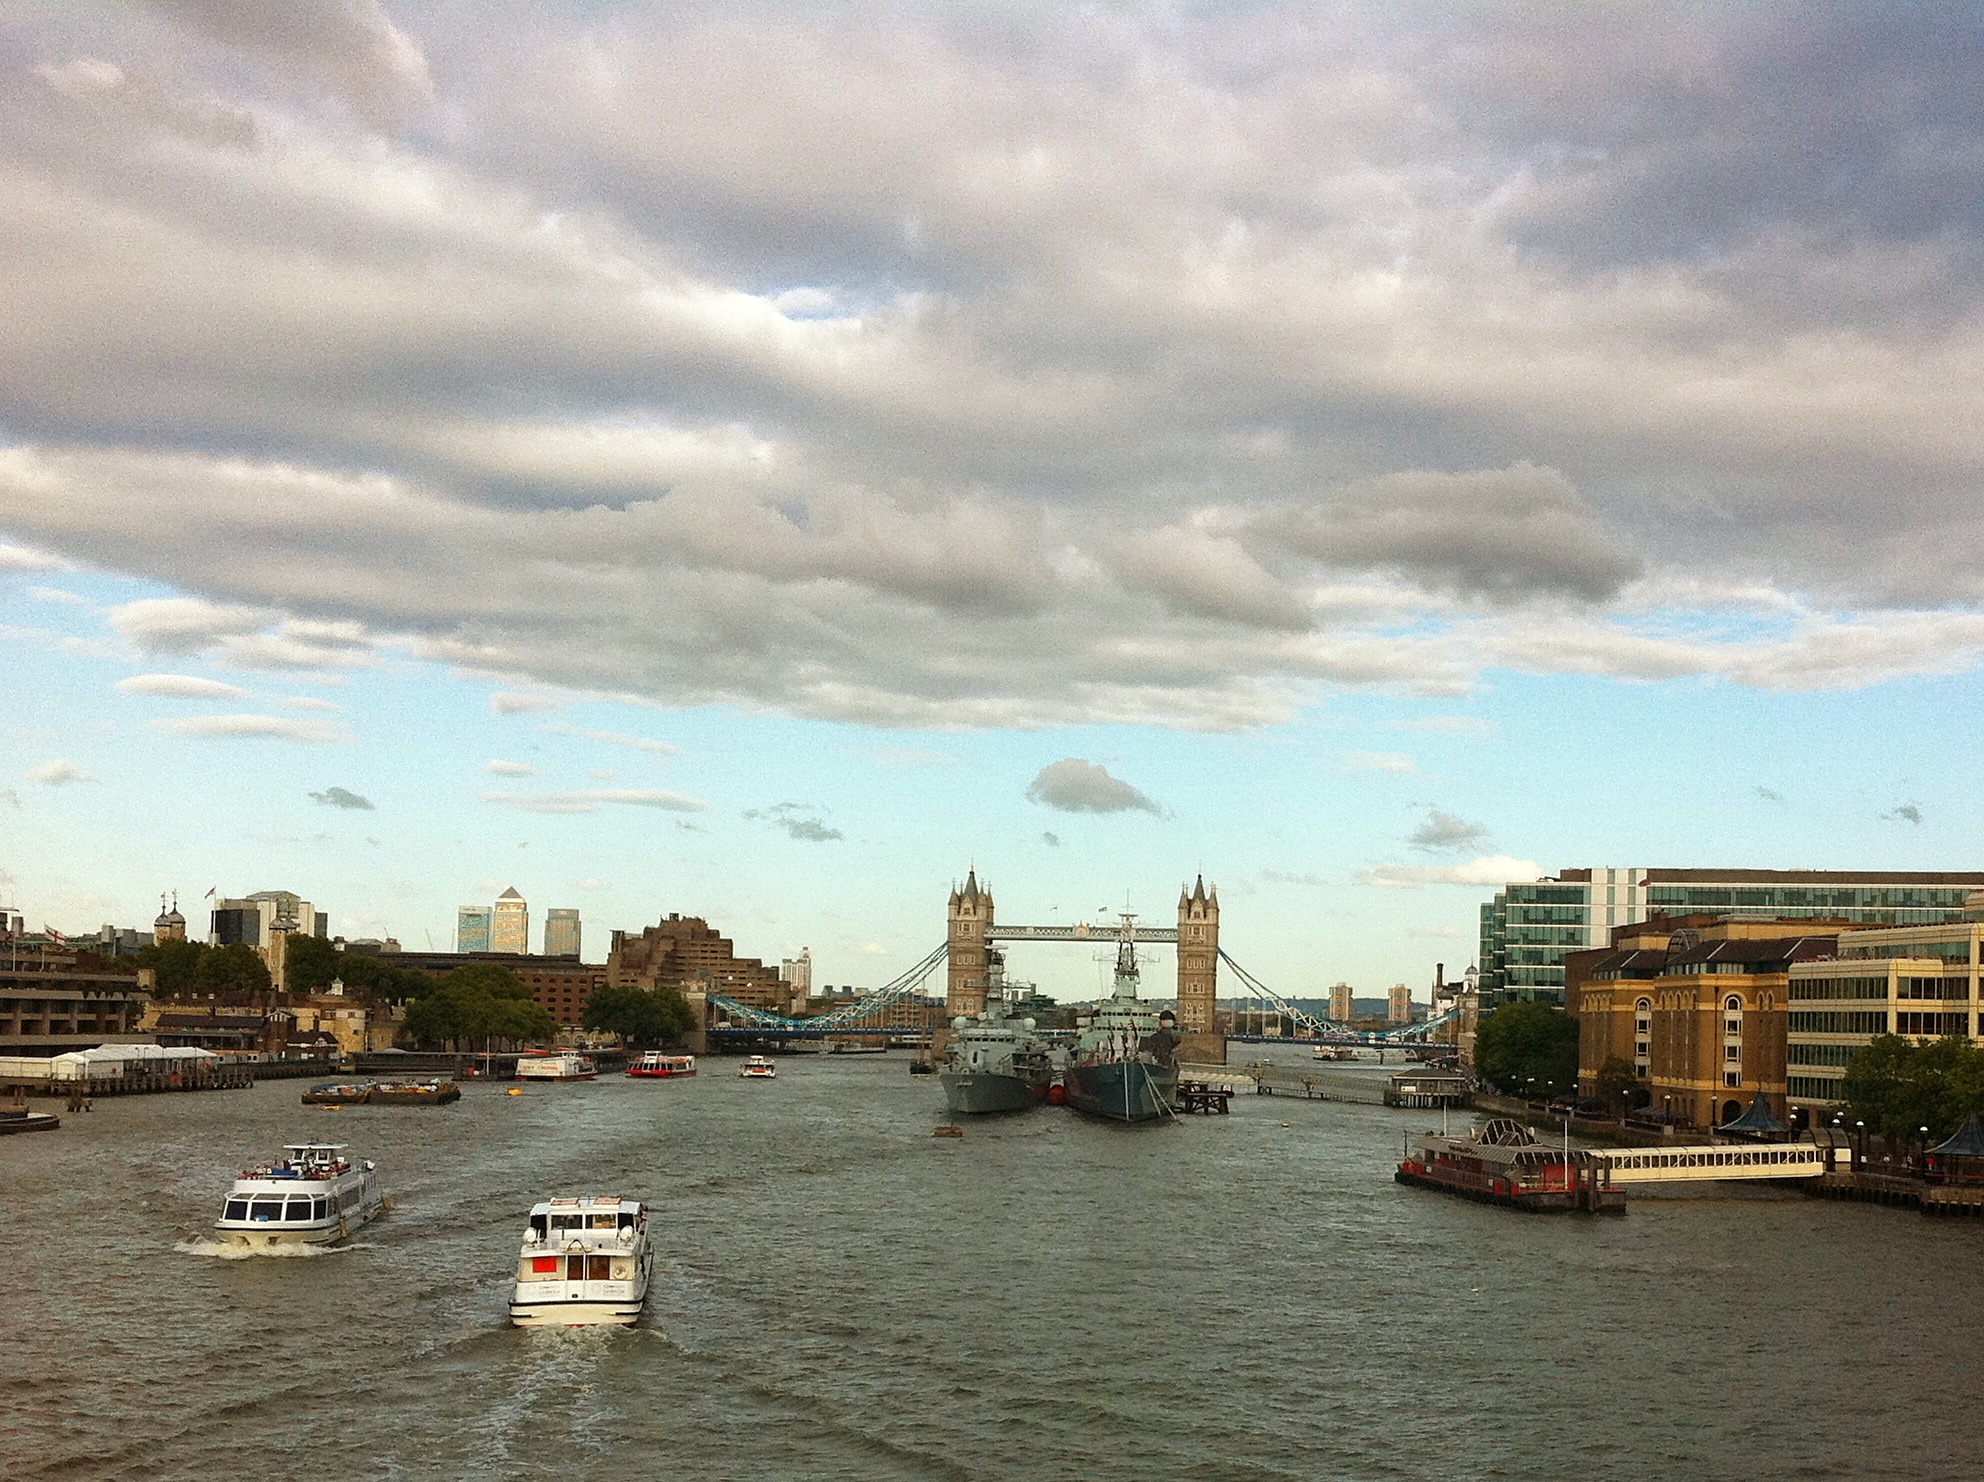 Day 322 – Thames commuters